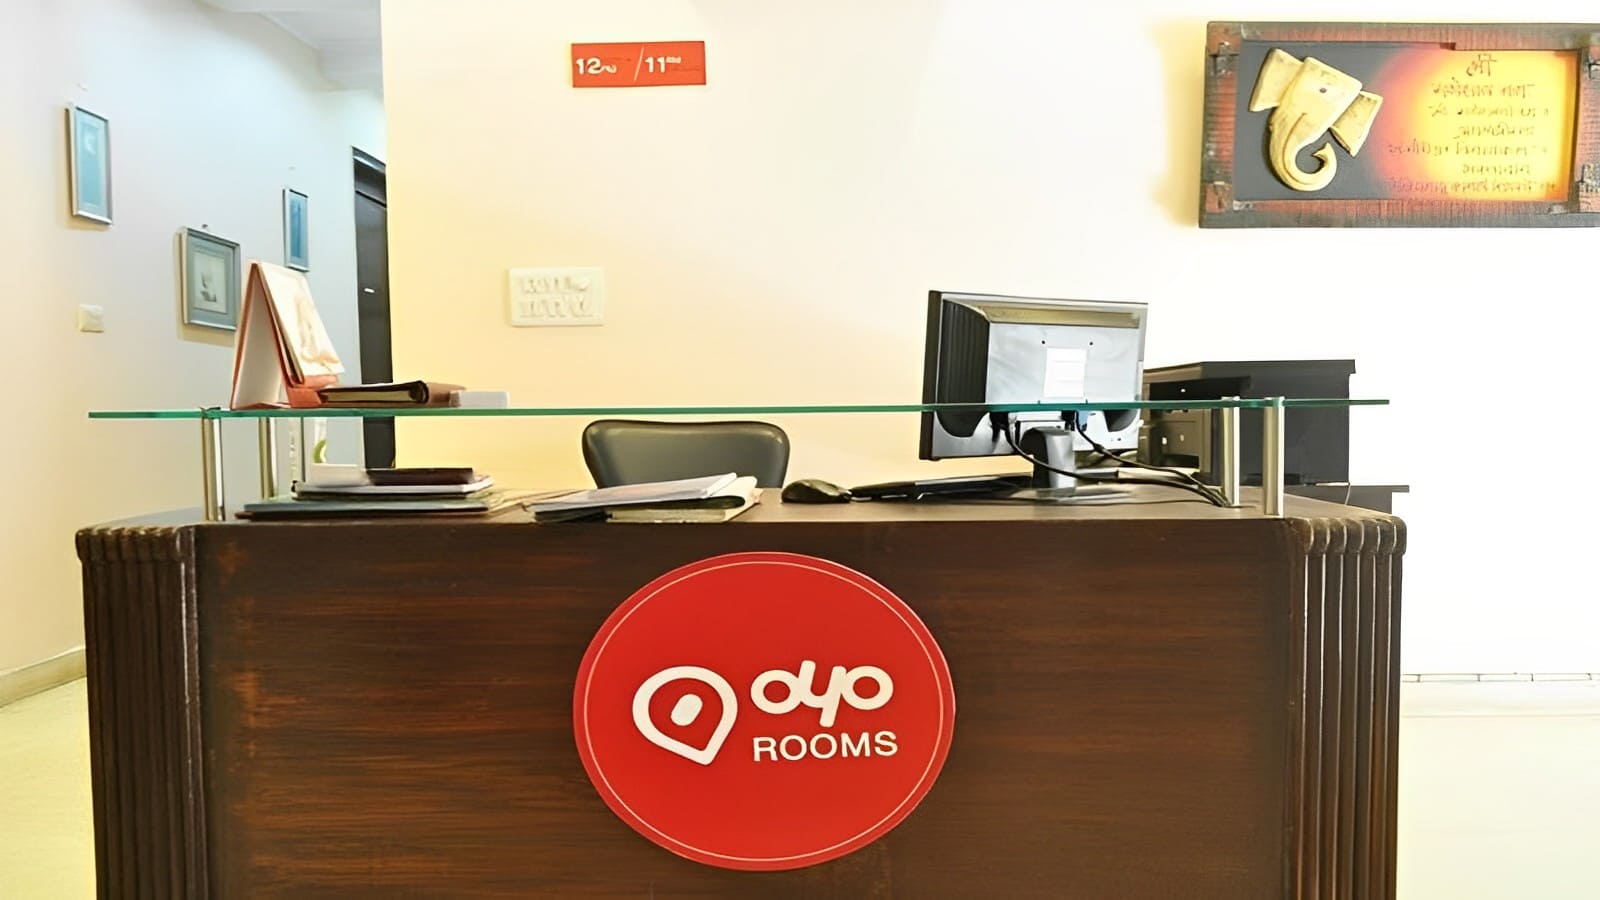 OYO forecasts over ₹5,700 Cr revenue for FY23